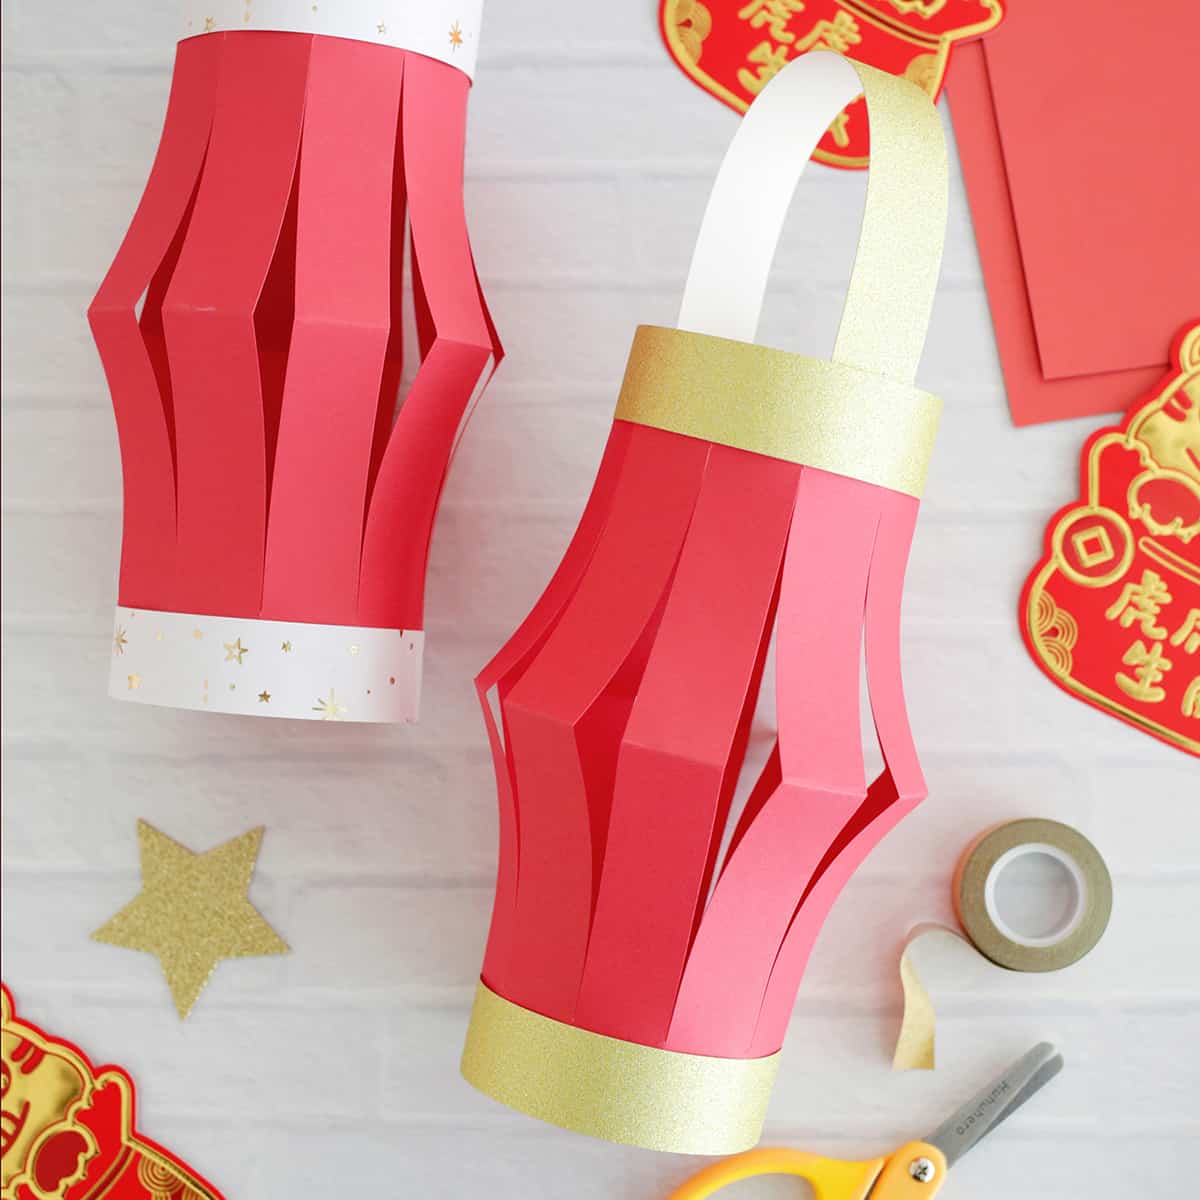 5 DIY Chinese New Year Decorations! Paper crafts! 